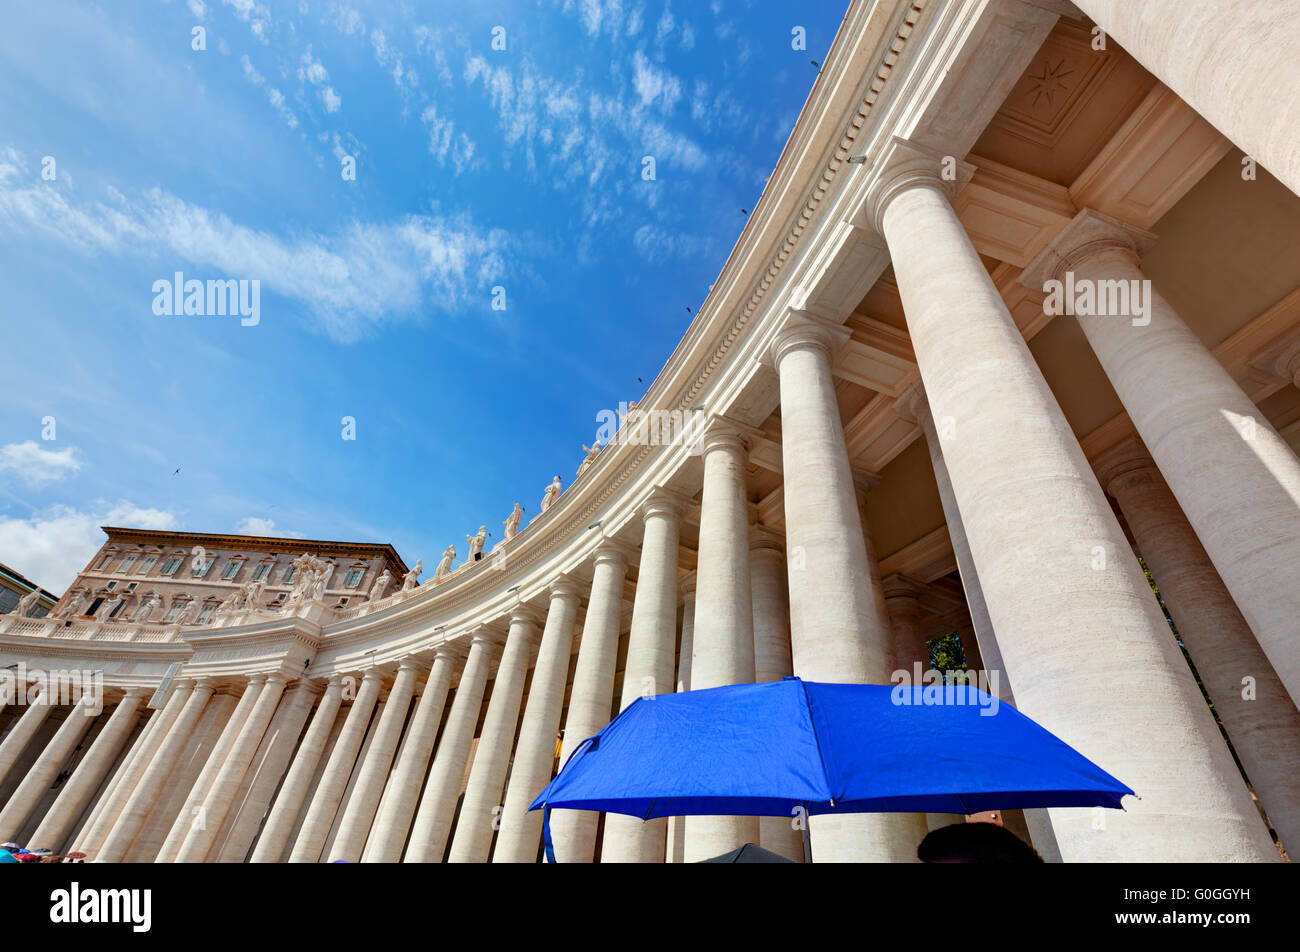 St. Peter#39;s Basilica colonnades in Vatican City. Blue umbrella harmonizes with sky Stock Photo